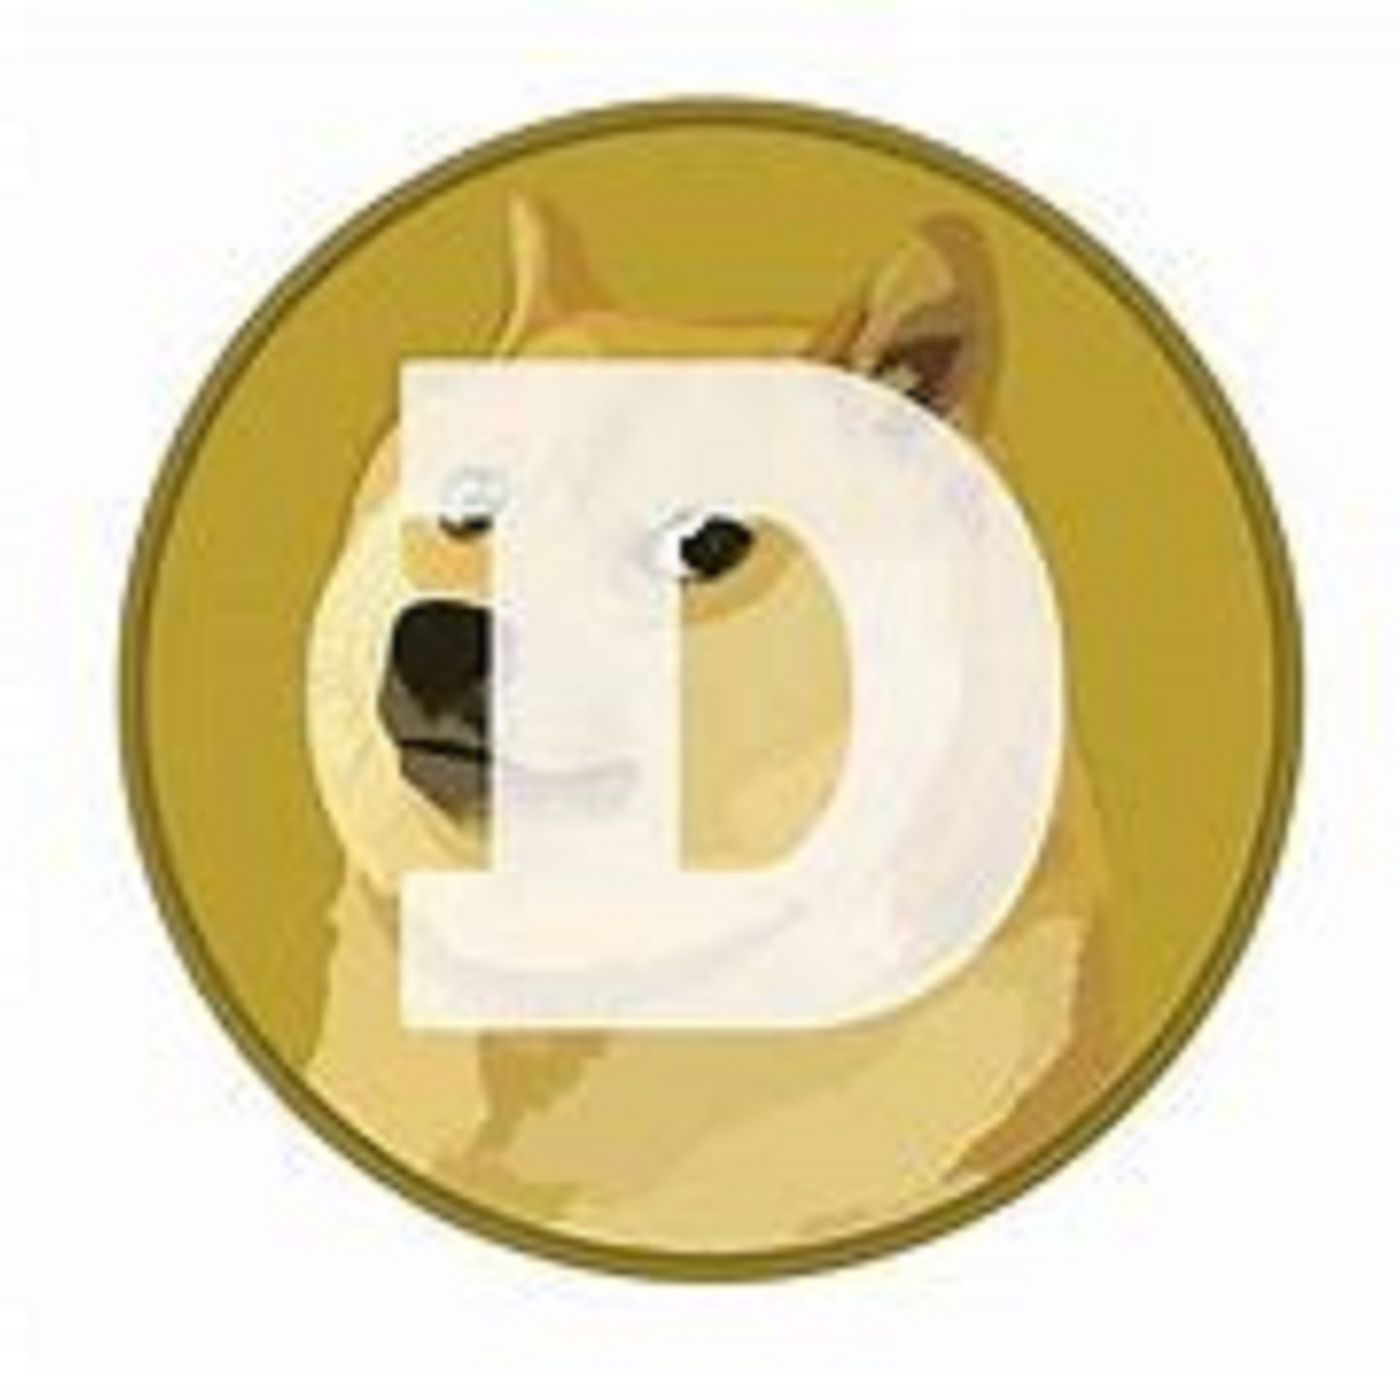 Dogecoin Price Holds Crucial Support But Can DOGE Clear This Hurdle?